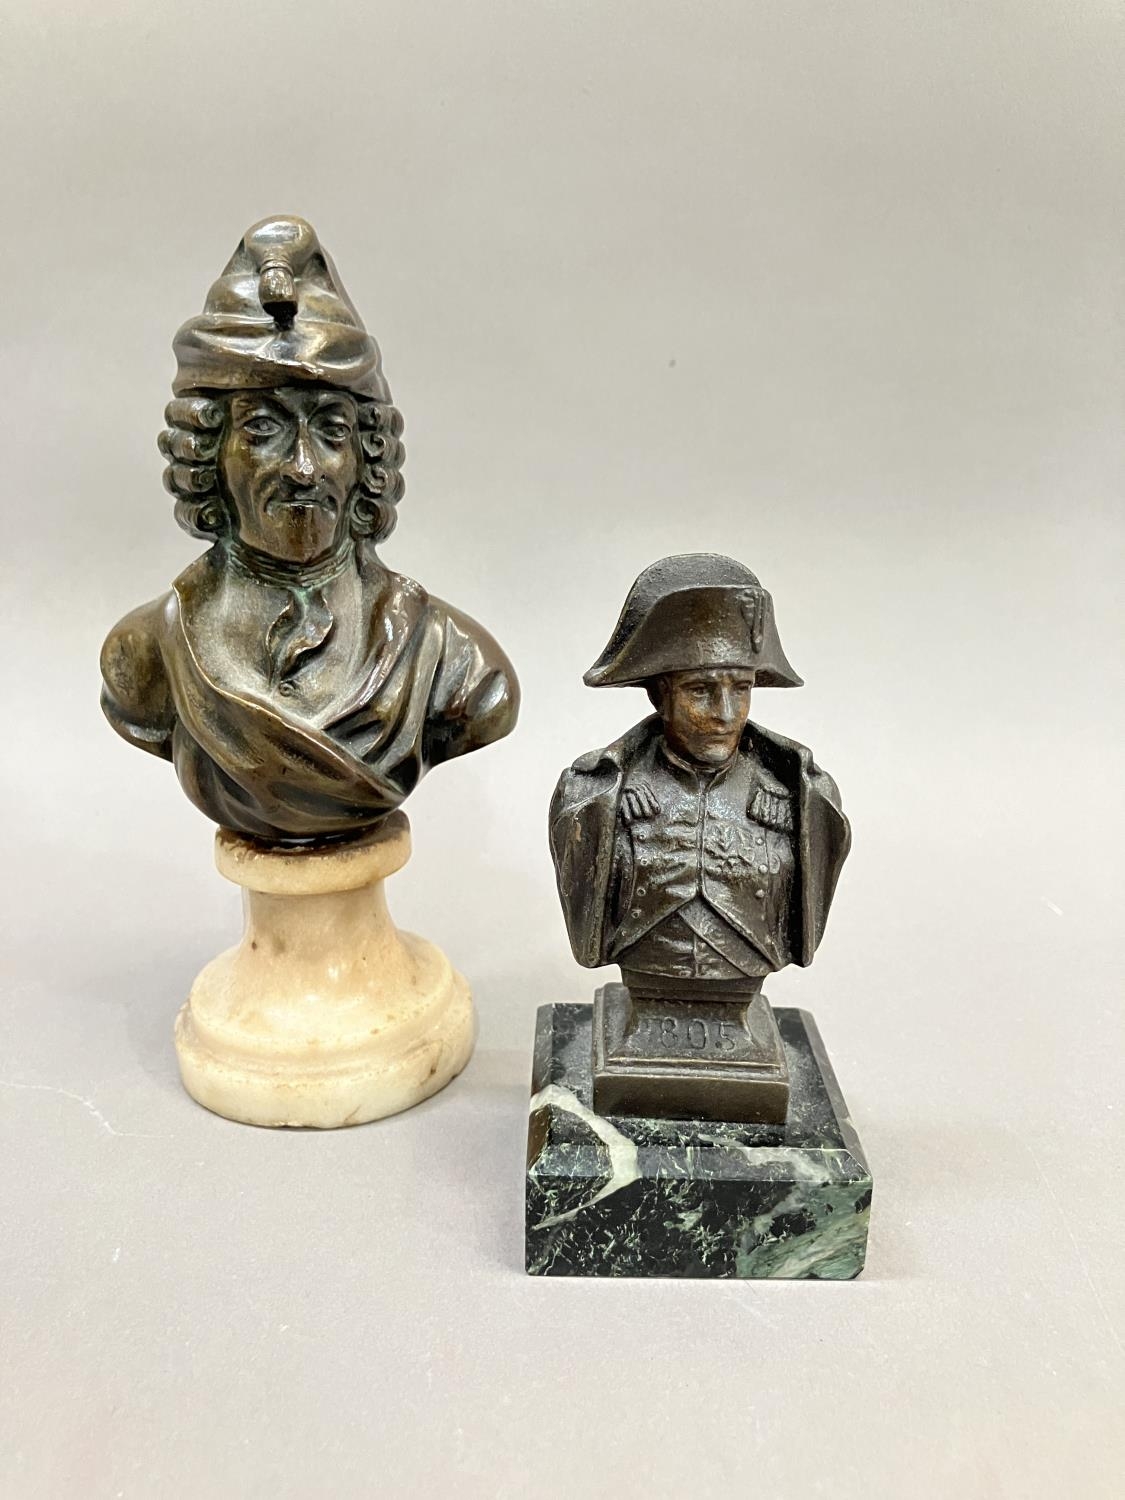 A bronze bust of Voltaire on a swept marble base, 15cm high together with a metal bust bust of - Image 2 of 4